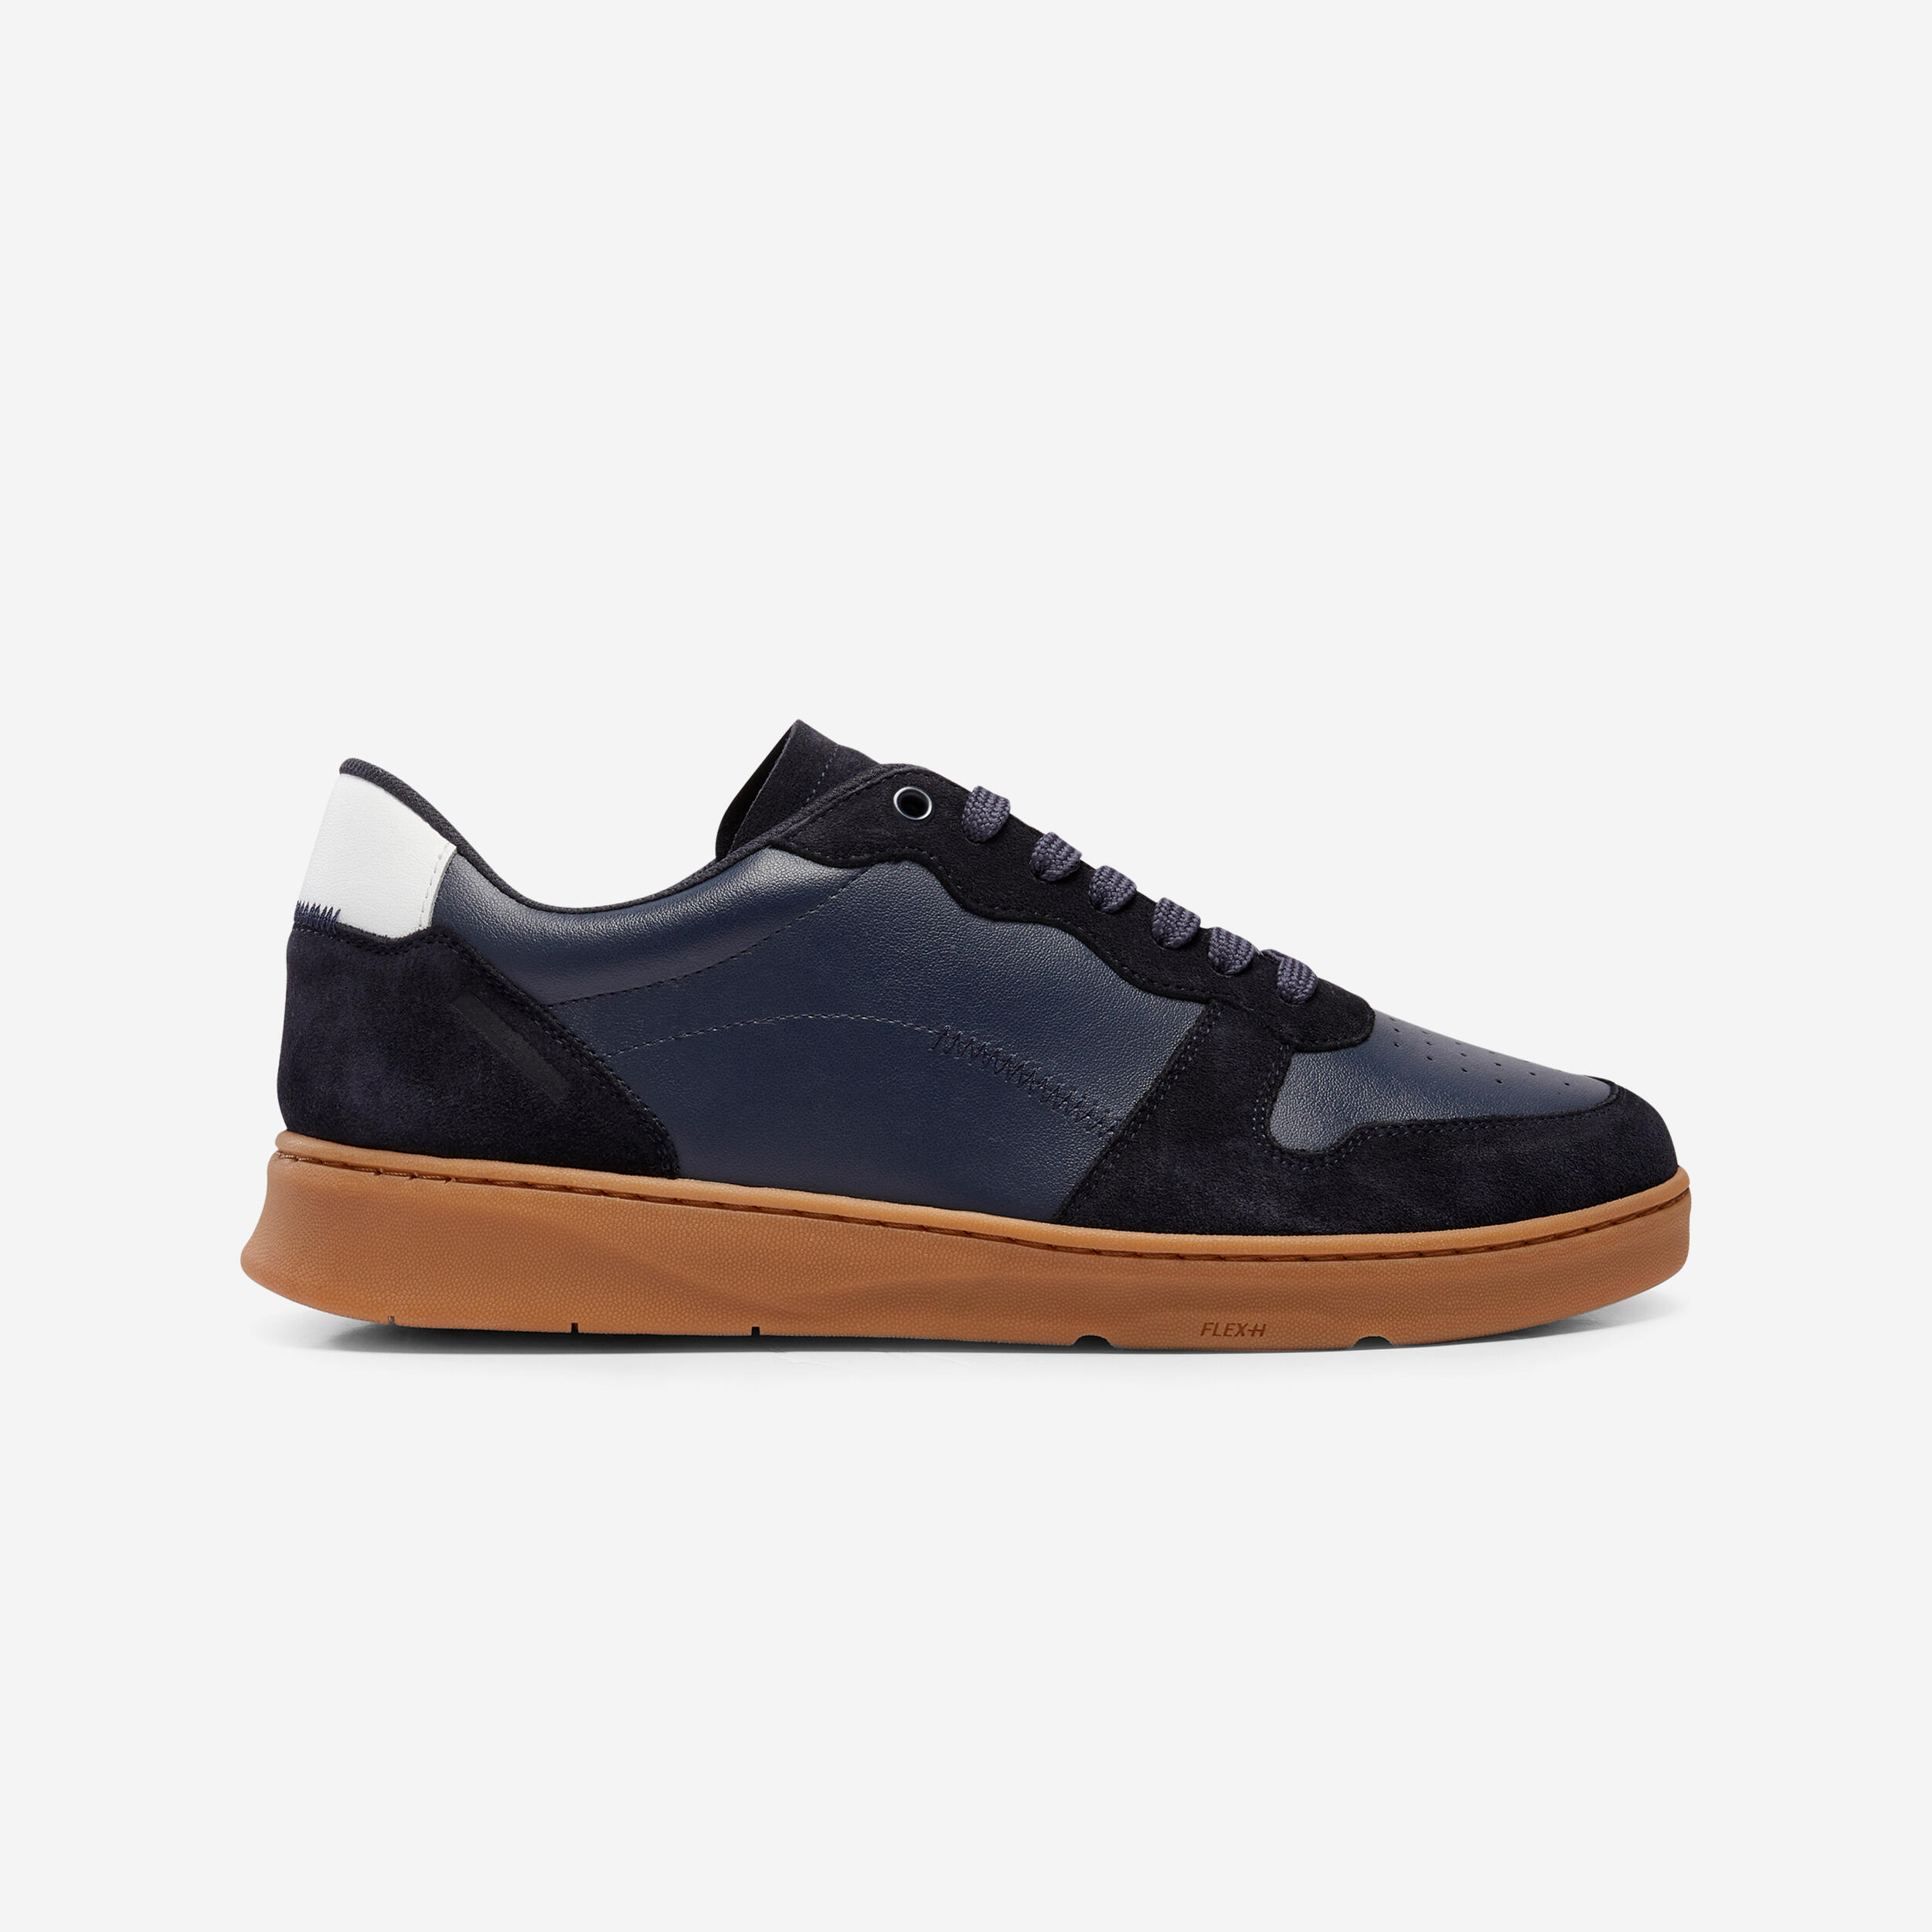 KALENJI MEN'S WALK PROTECT LEATHER TRAINERS - NAVY BLUE